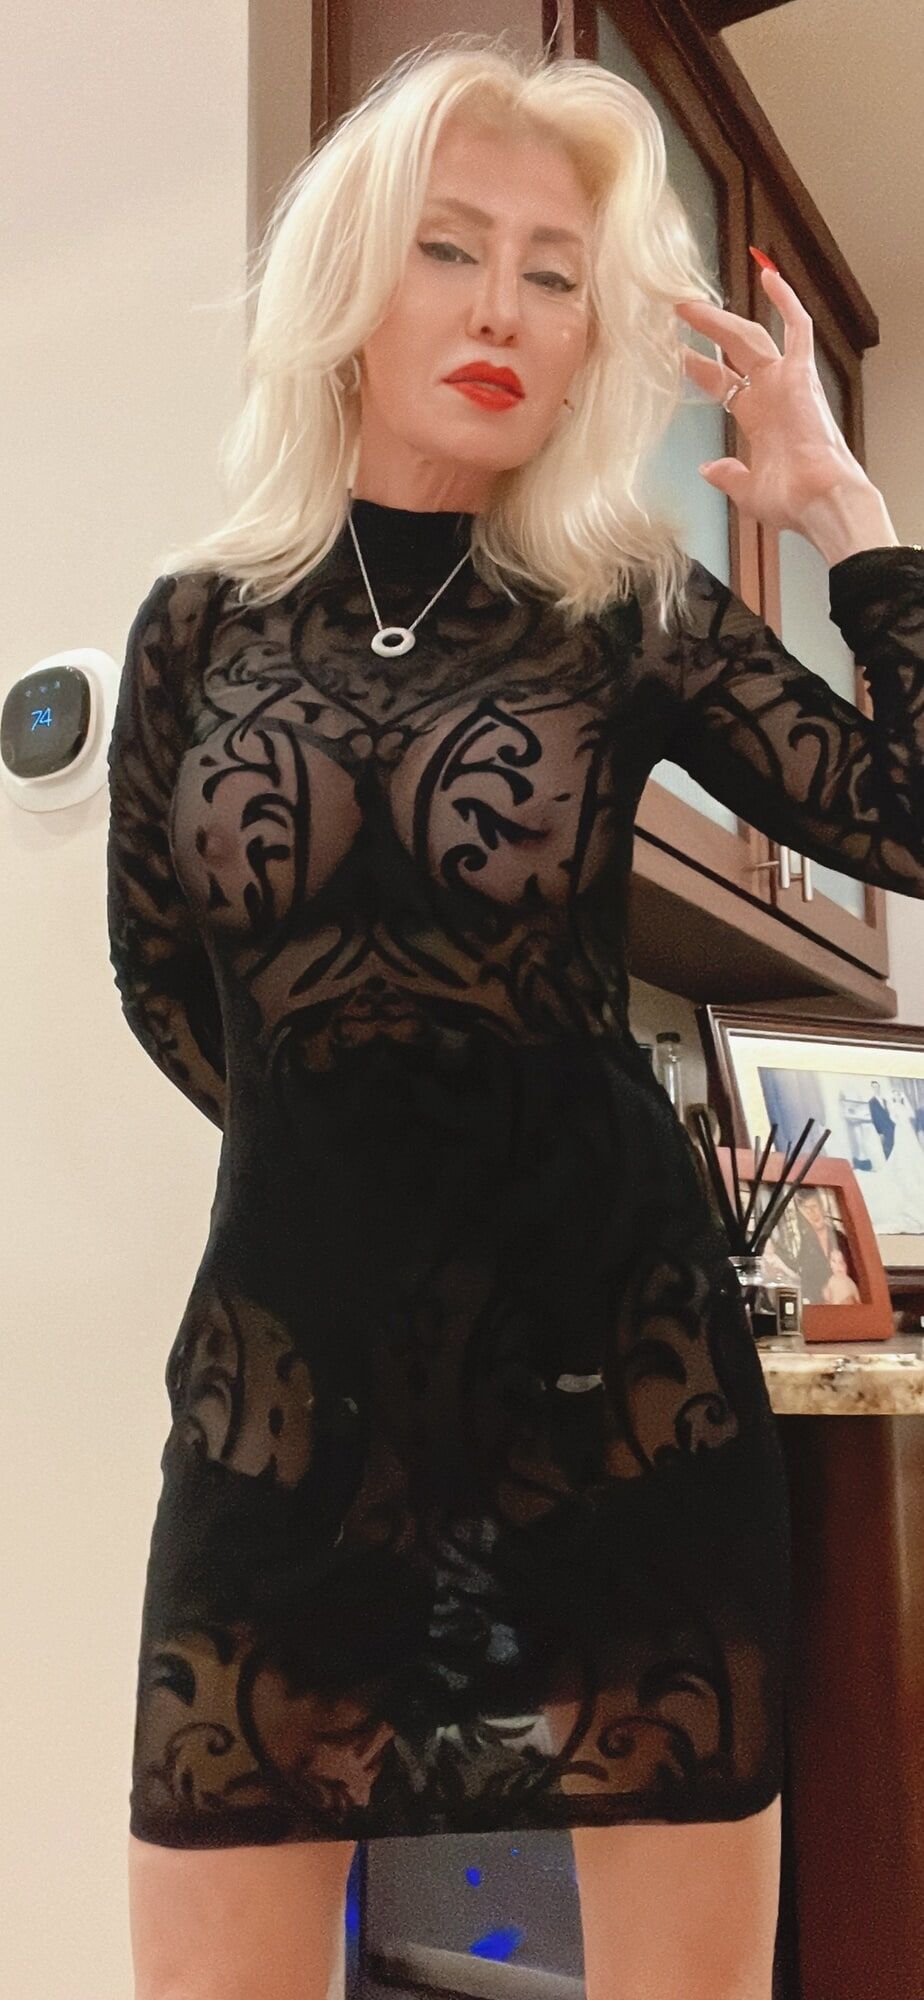 Going out in a sheer dress again 